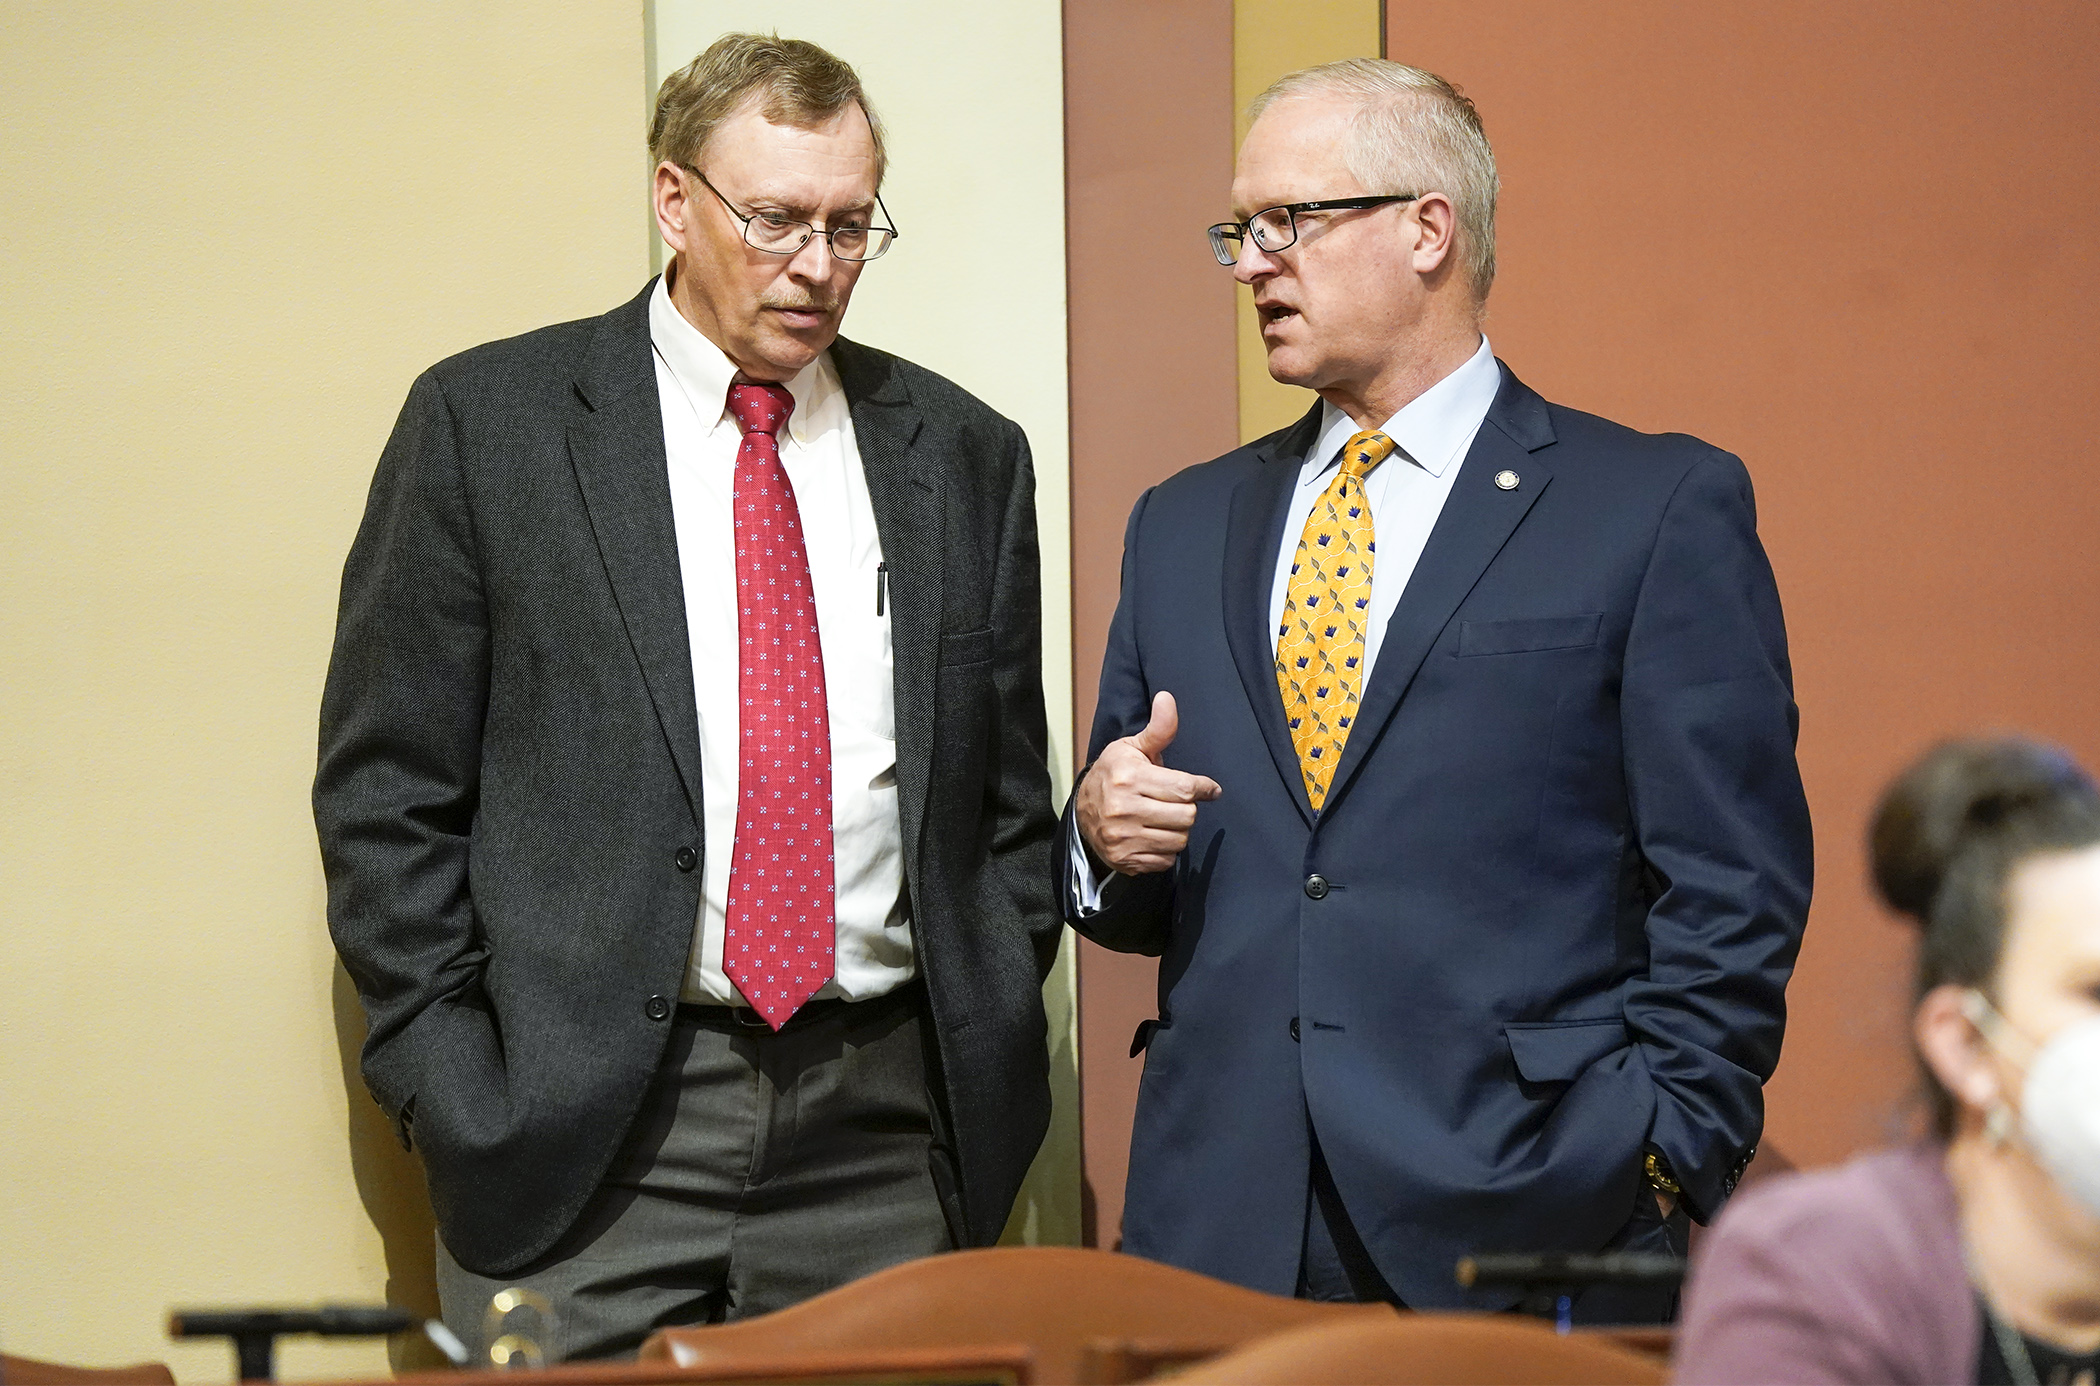 Rep. Michael Nelson, chair of the House State Government Finance and Elections Committee, confers with Rep. Jim Nash before the House took up HF4293 during the April 26 floor session. (Photo by Paul Battaglia)